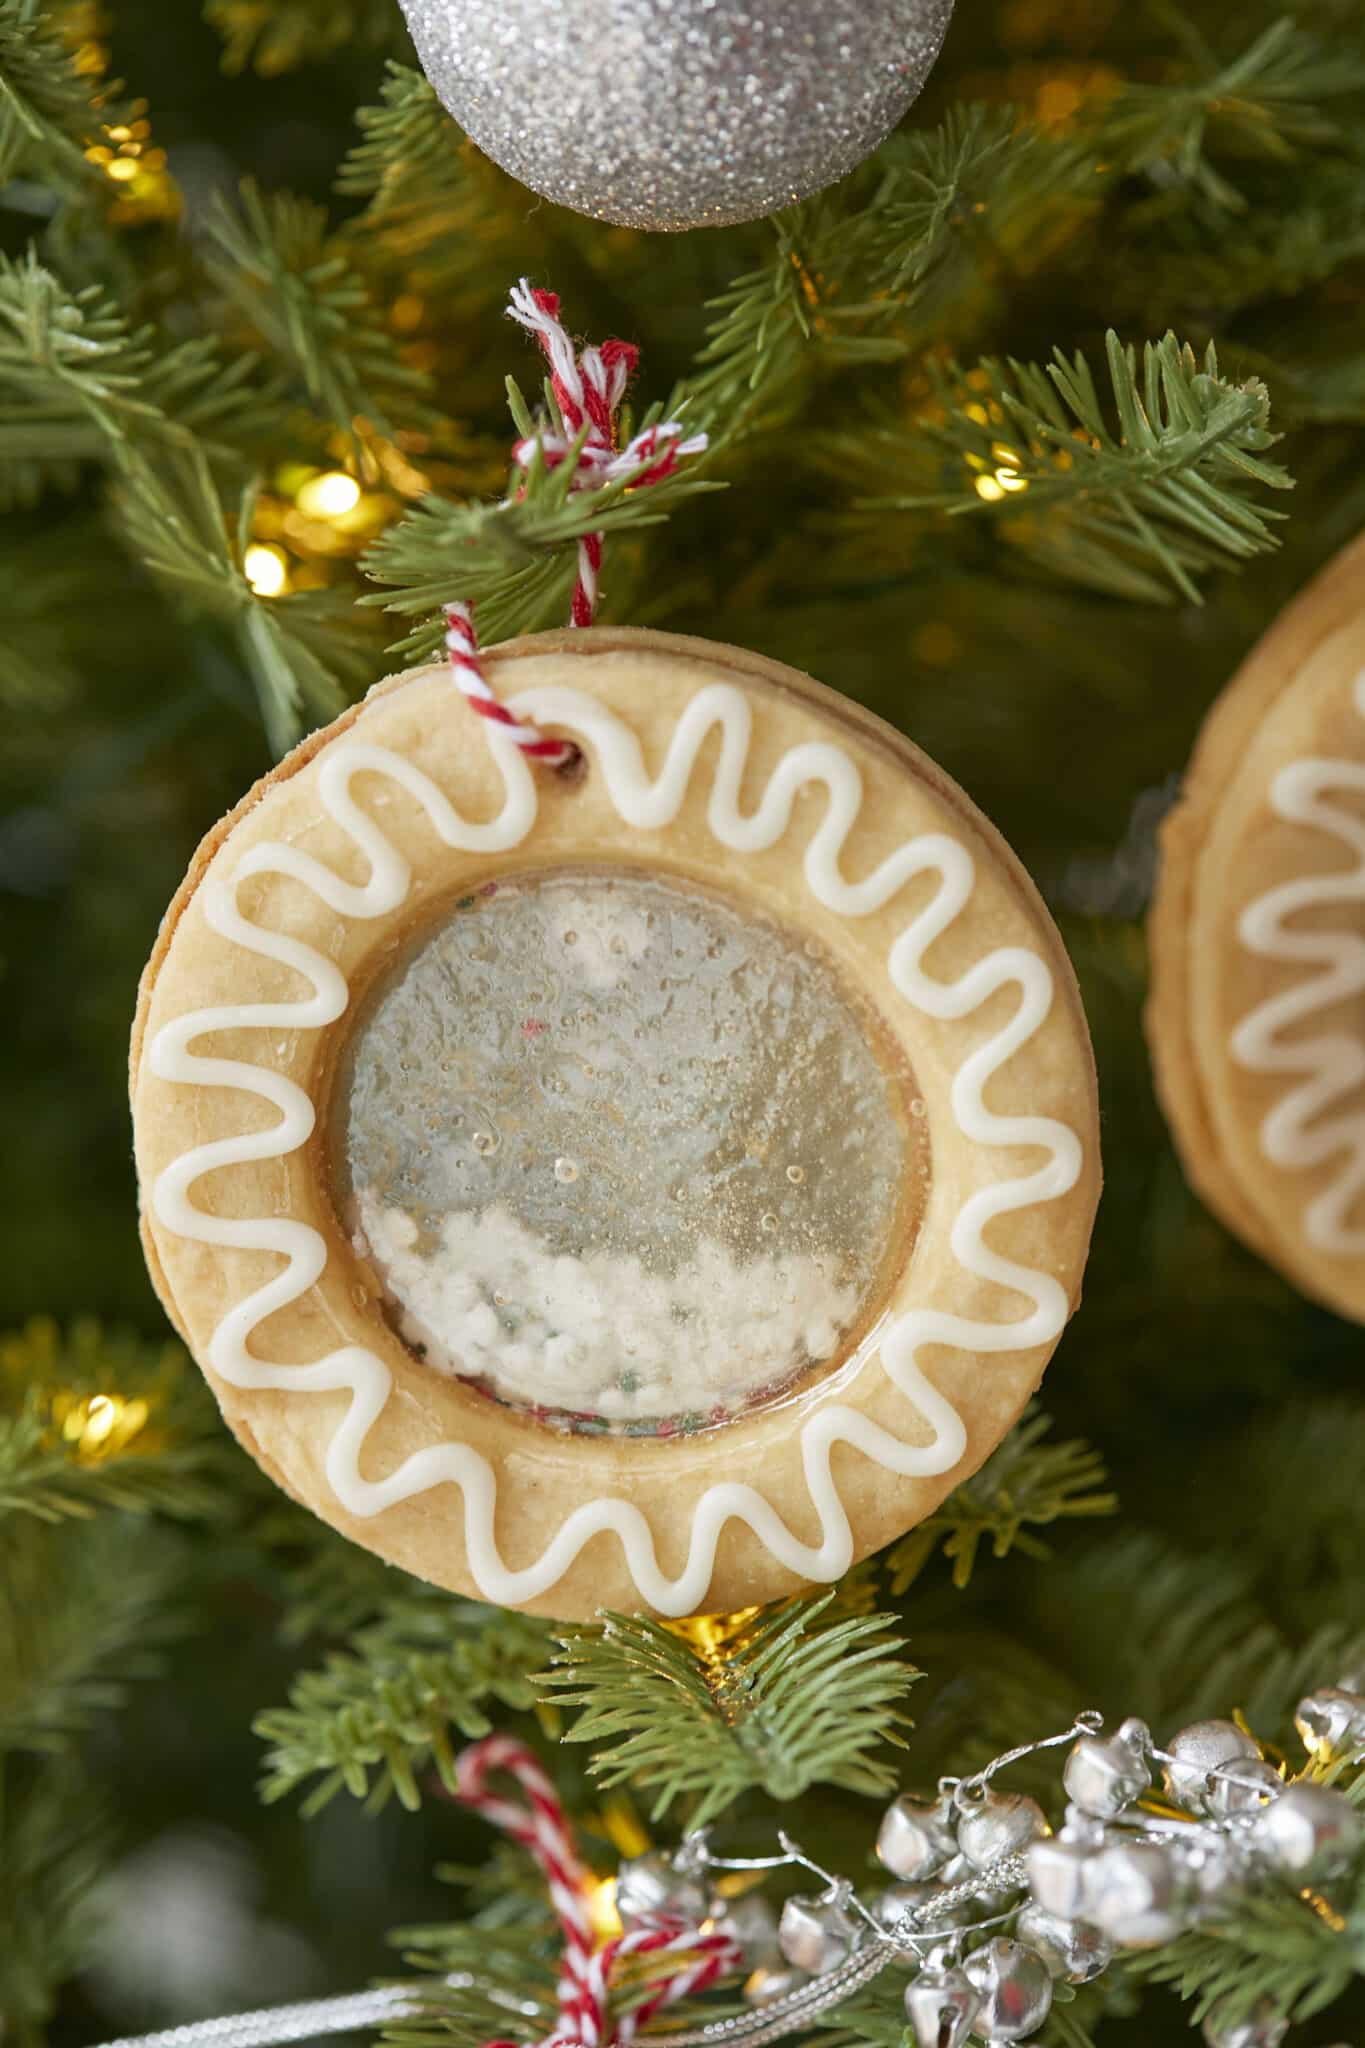 Snow Globe Cookies are hanging in the Christmas tree. They are made with crispy traditional Irish shortbread, which are creatively dressed up with snow-white icing. The clever filling formed a shiny mirror center, casting a glow throughout the joyful space. 